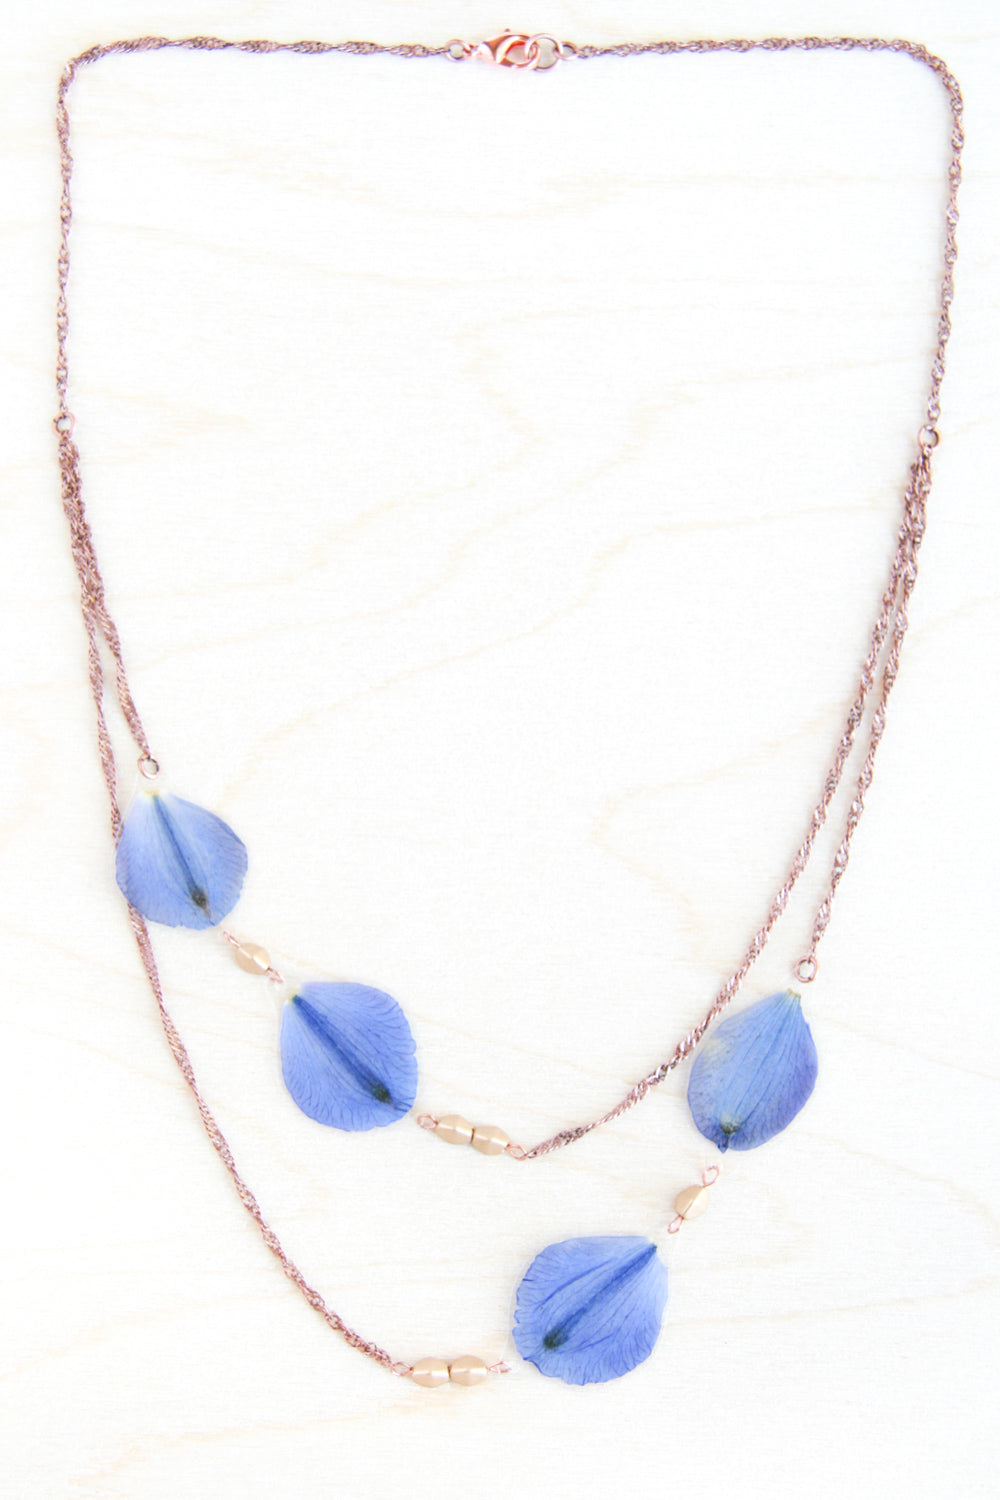 Delphinium Pressed Petal Necklace with Flax Metallic Glass Beads